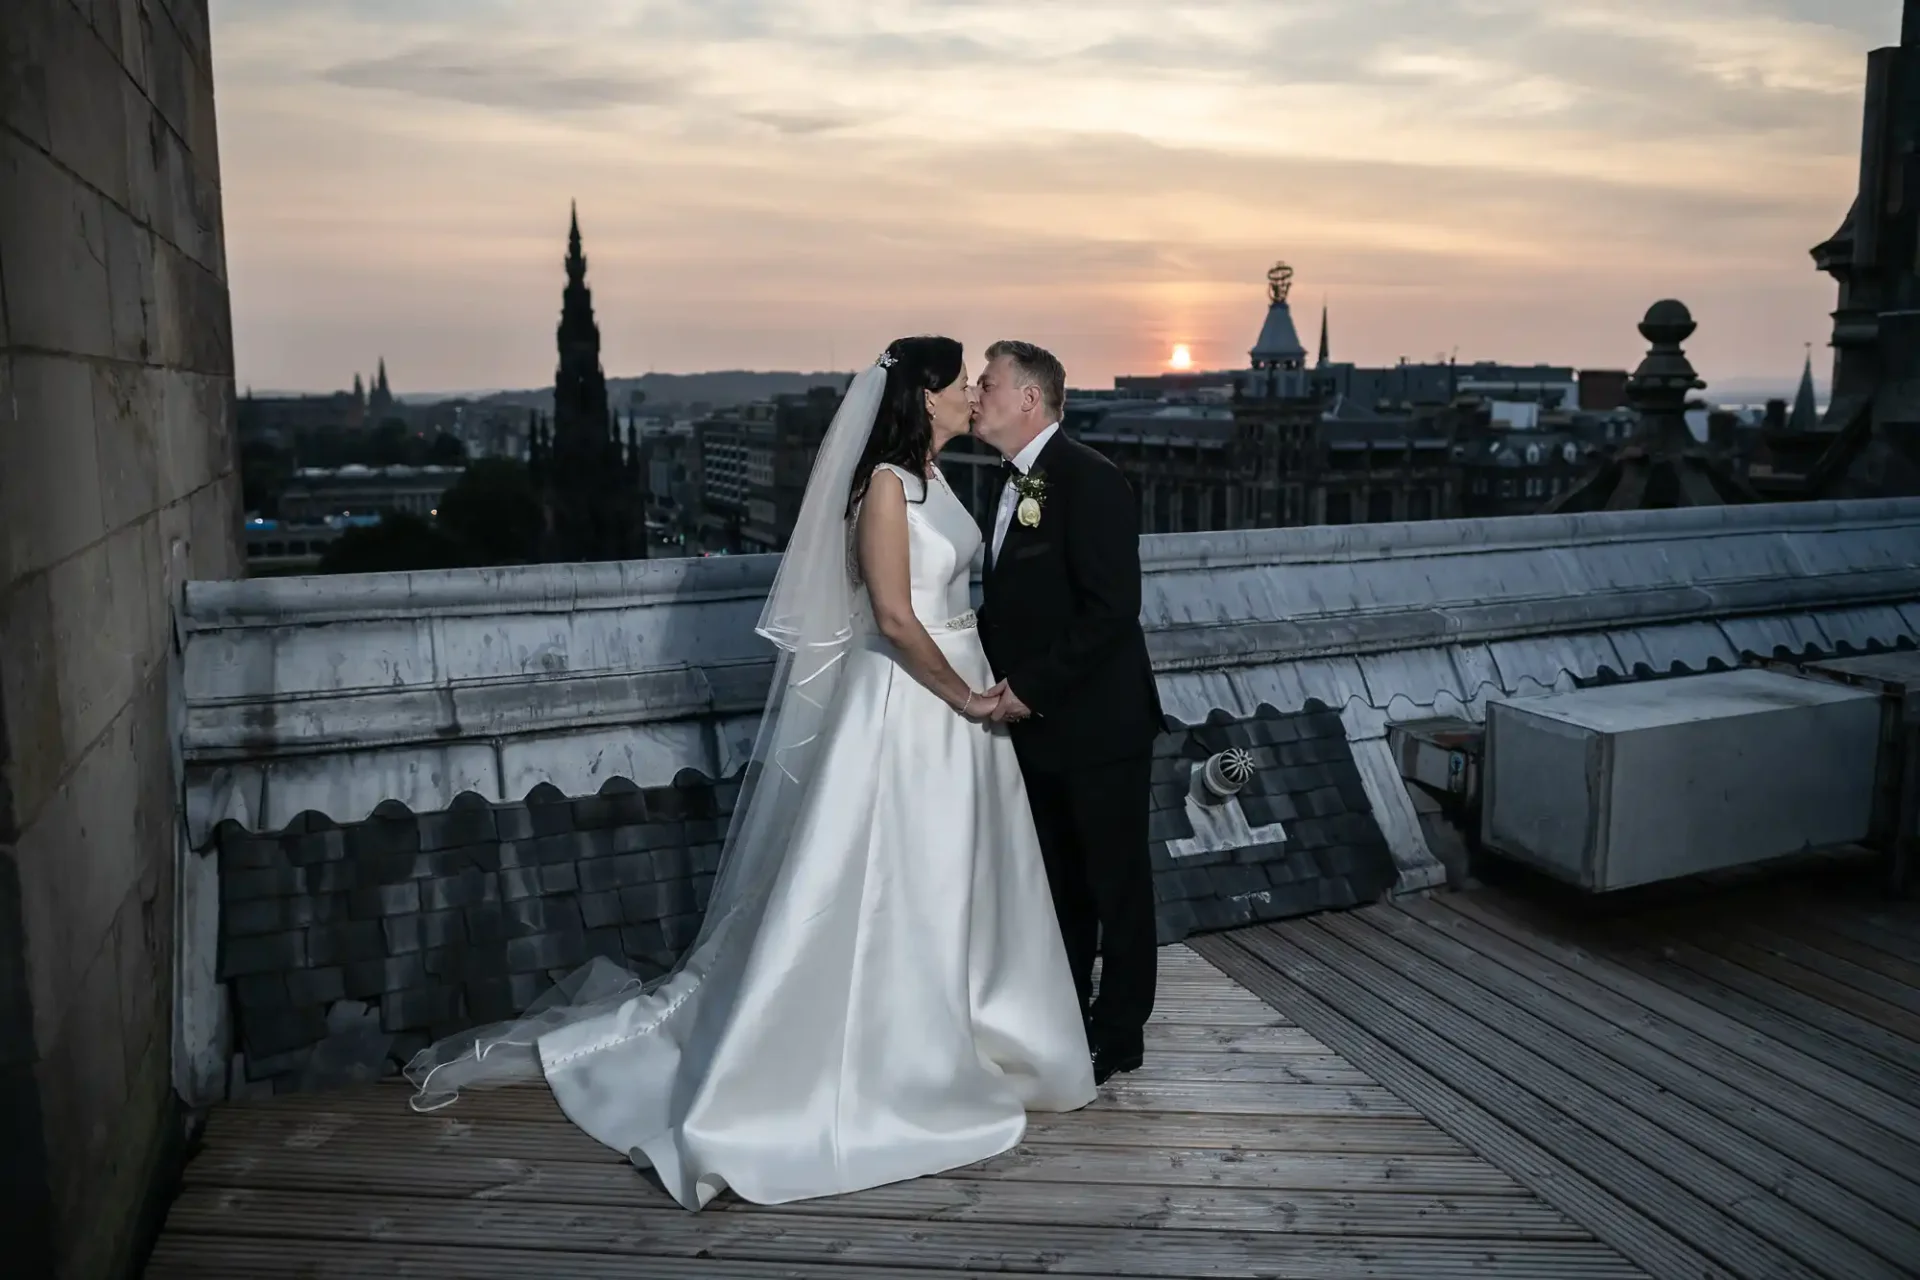 Bride and groom holding hands and kissing at sunset on a city rooftop with skyline in the background.